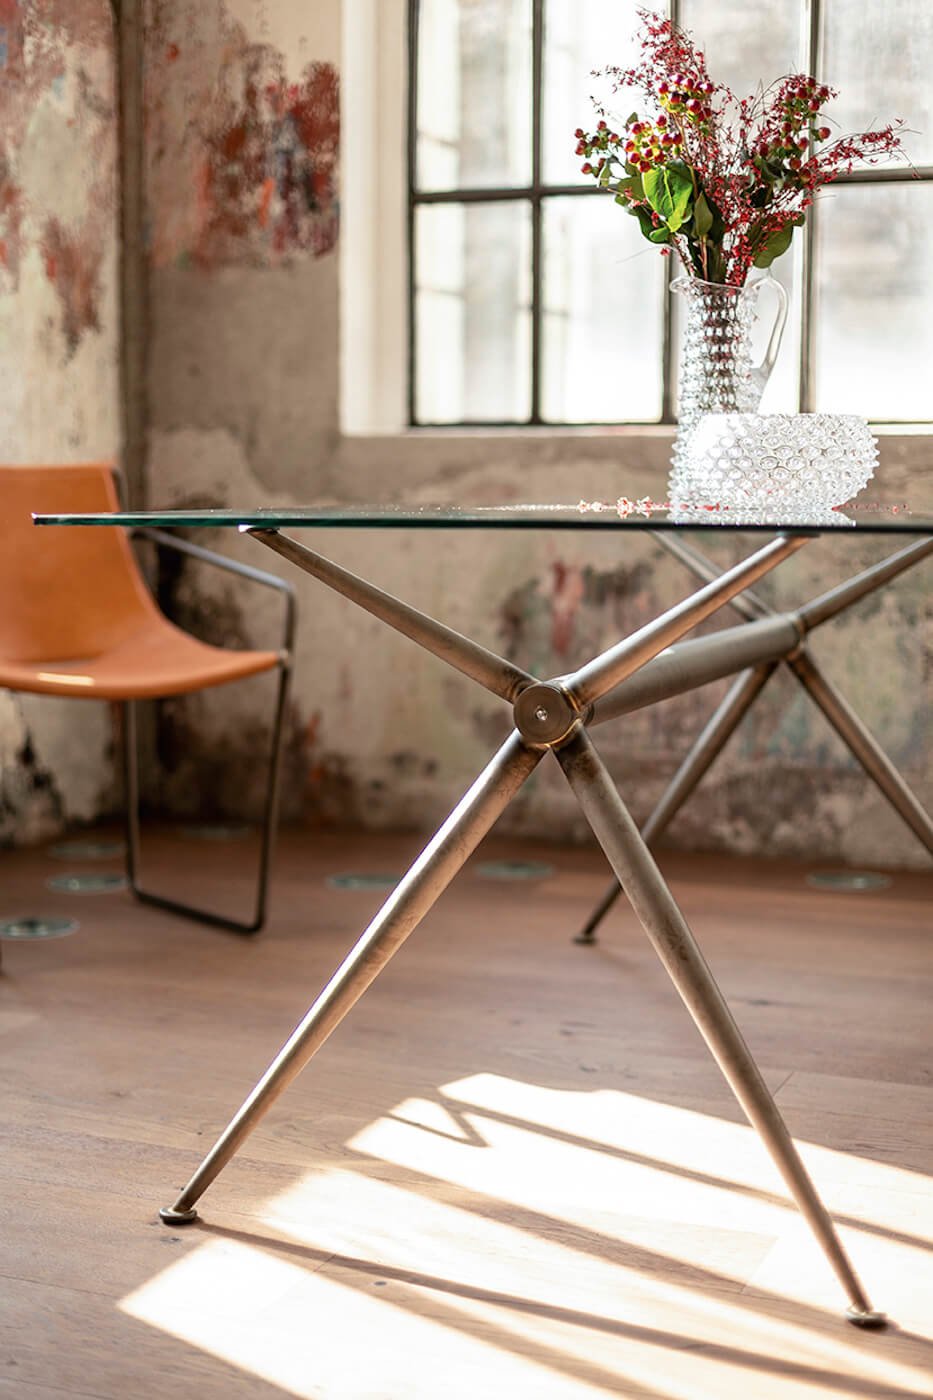 Brioso Dining Table desk from Midj